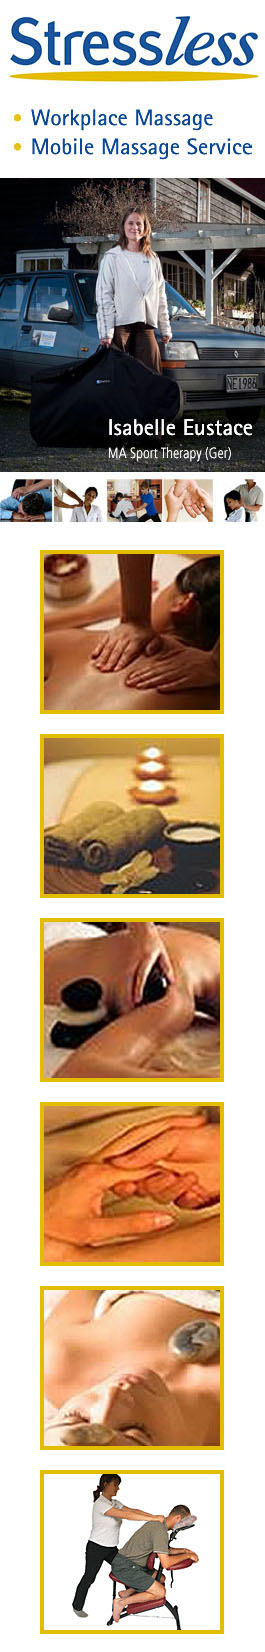 Profile picture for Stressless Massage